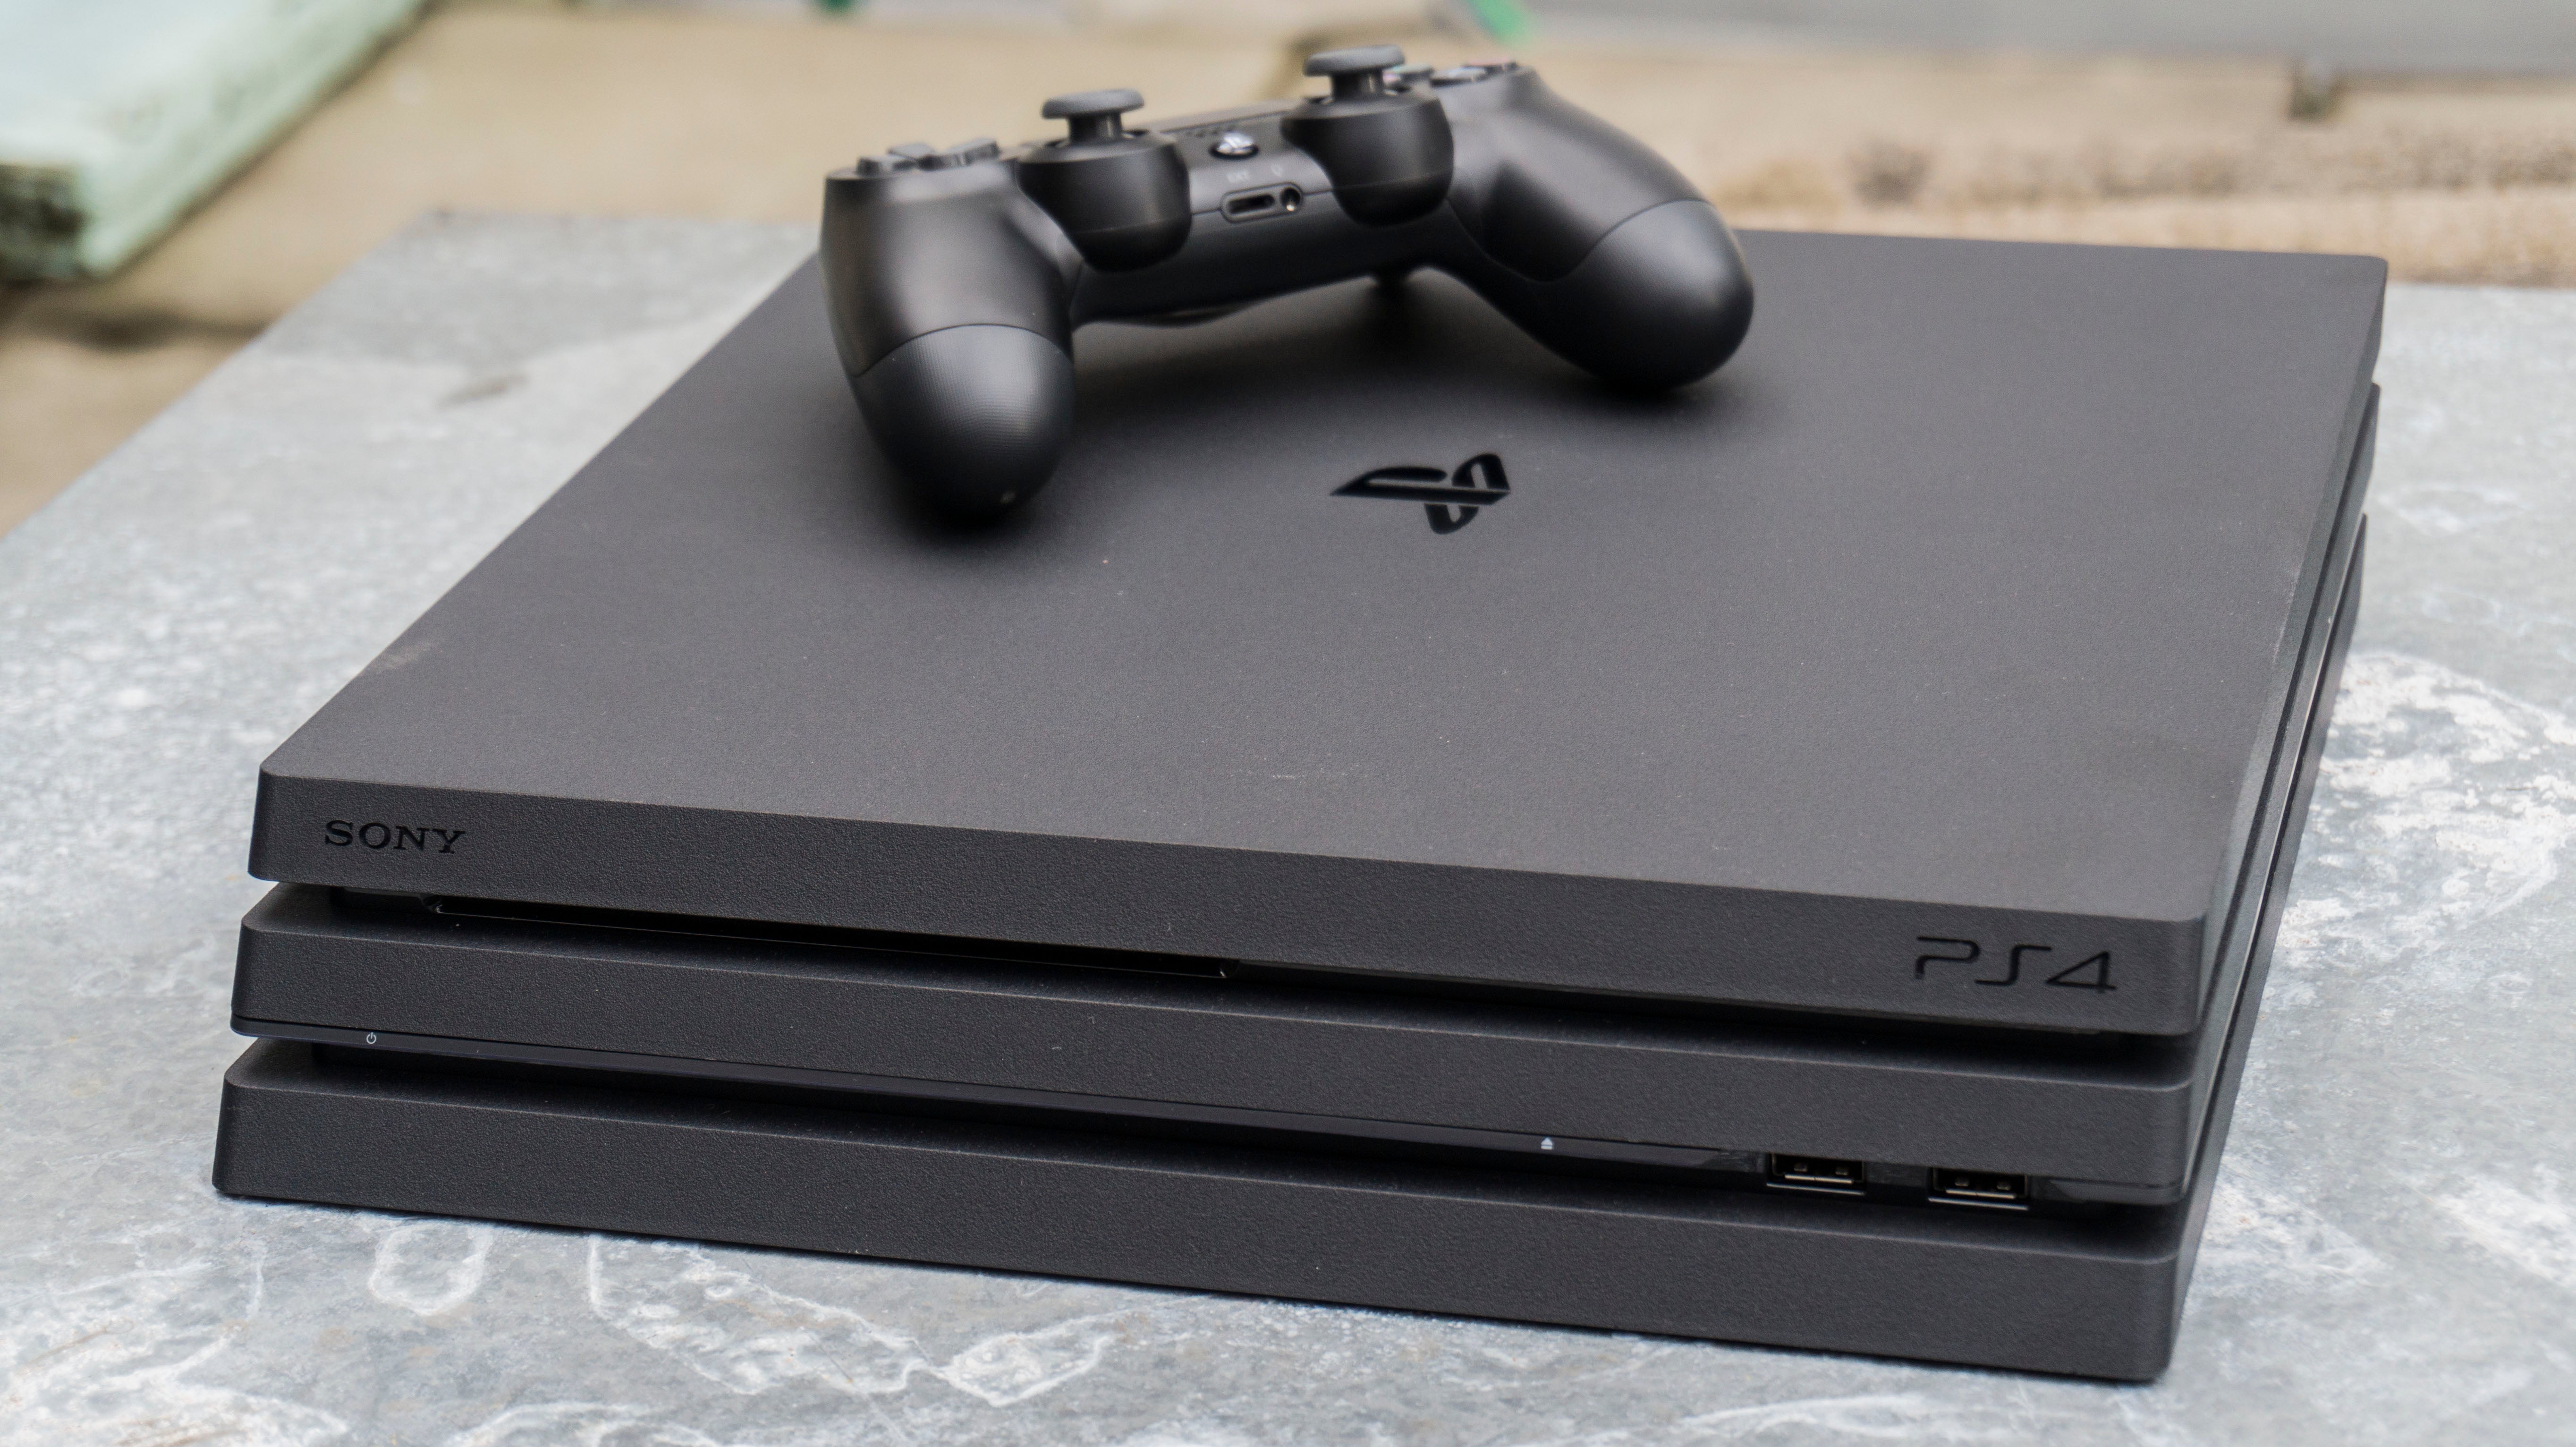 Bajar utilizar añadir PS4 Pro review: Sony's answer to 4K HDR gaming and the Xbox One X | Expert  Reviews